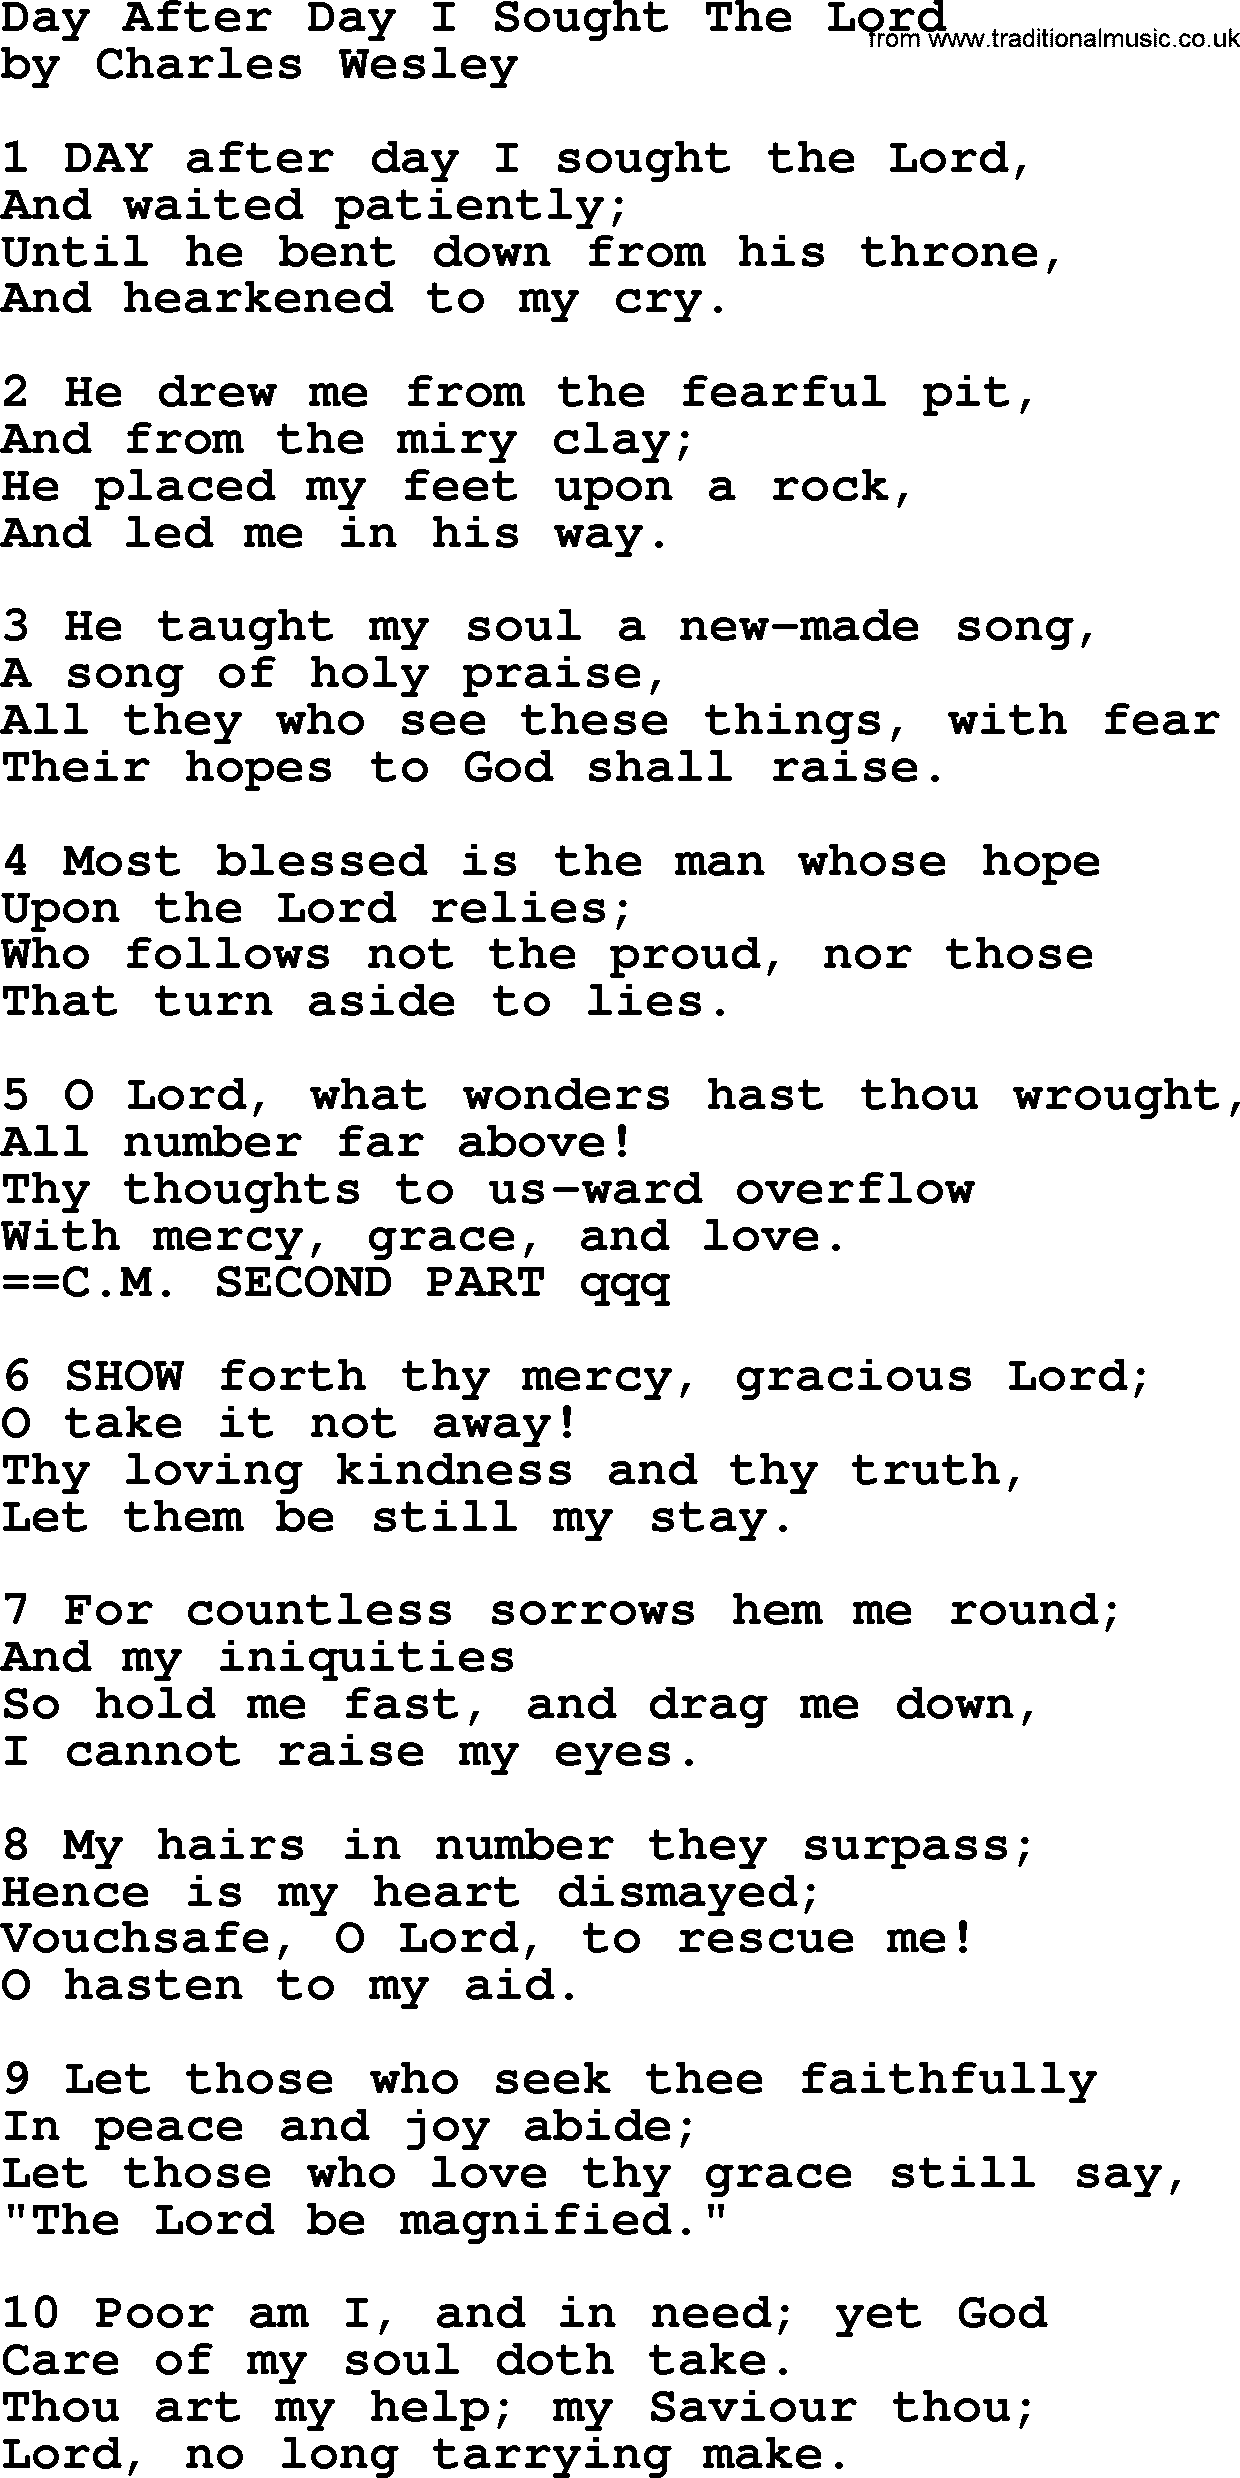 Charles Wesley hymn: Day After Day I Sought The Lord, lyrics